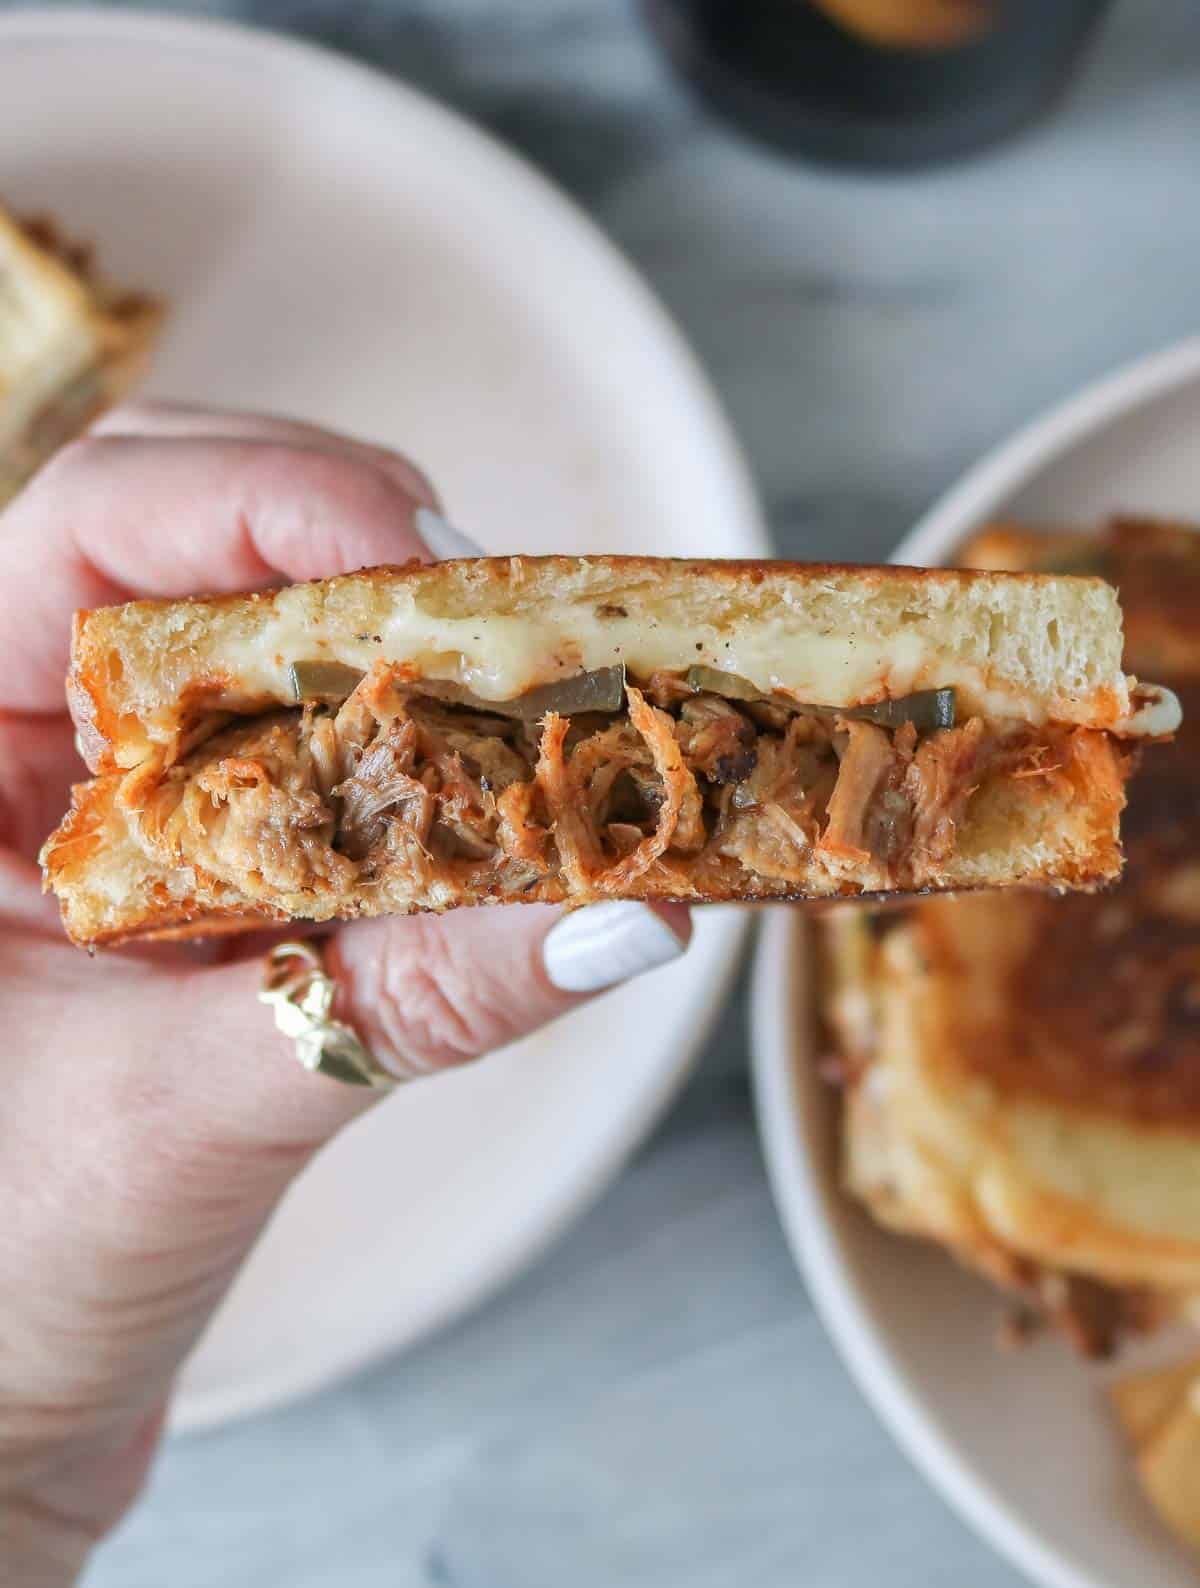 Hand holding one half of a pulled pork grilled cheese sandwich.